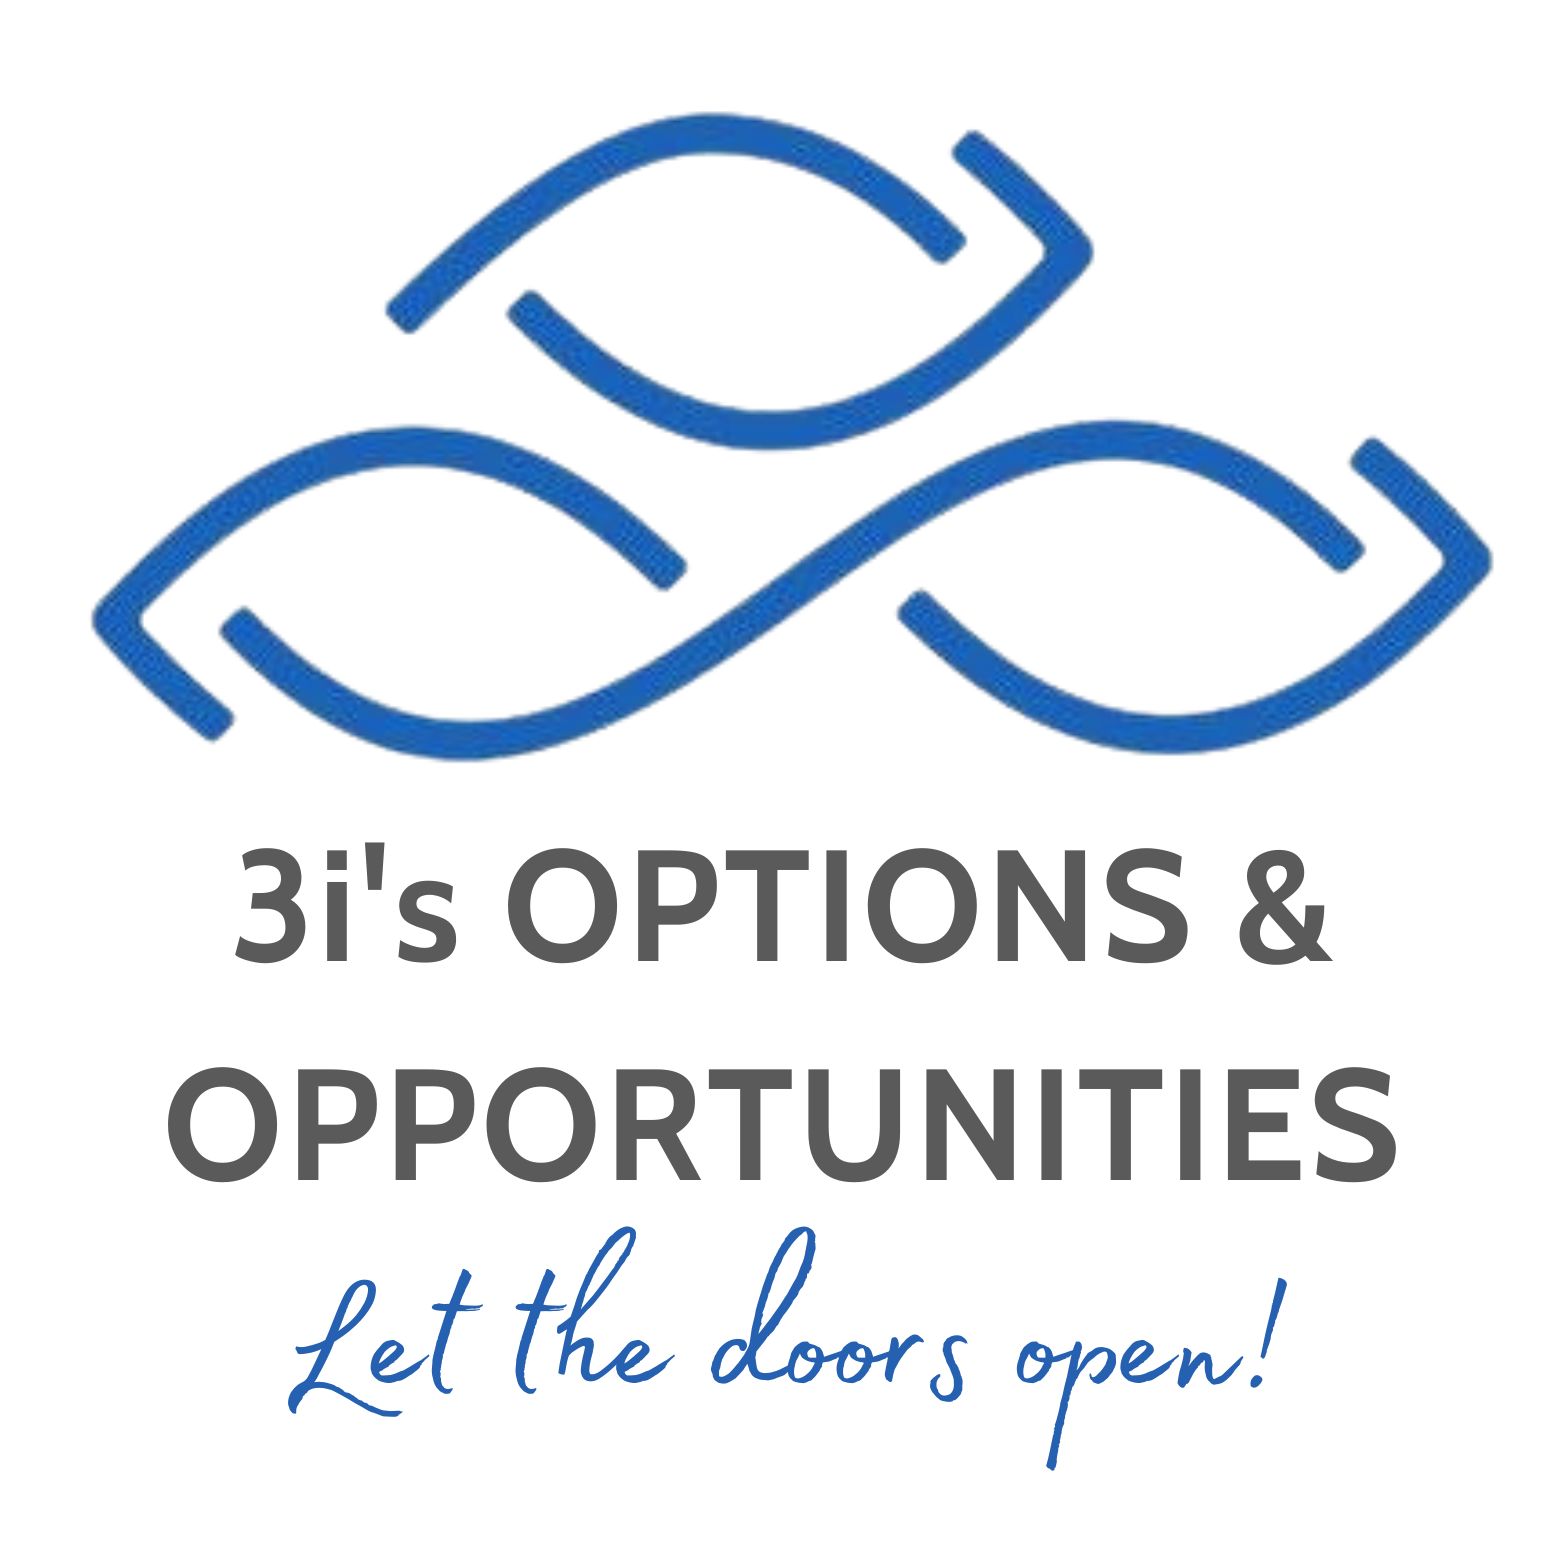 3i's Options & Opportunities